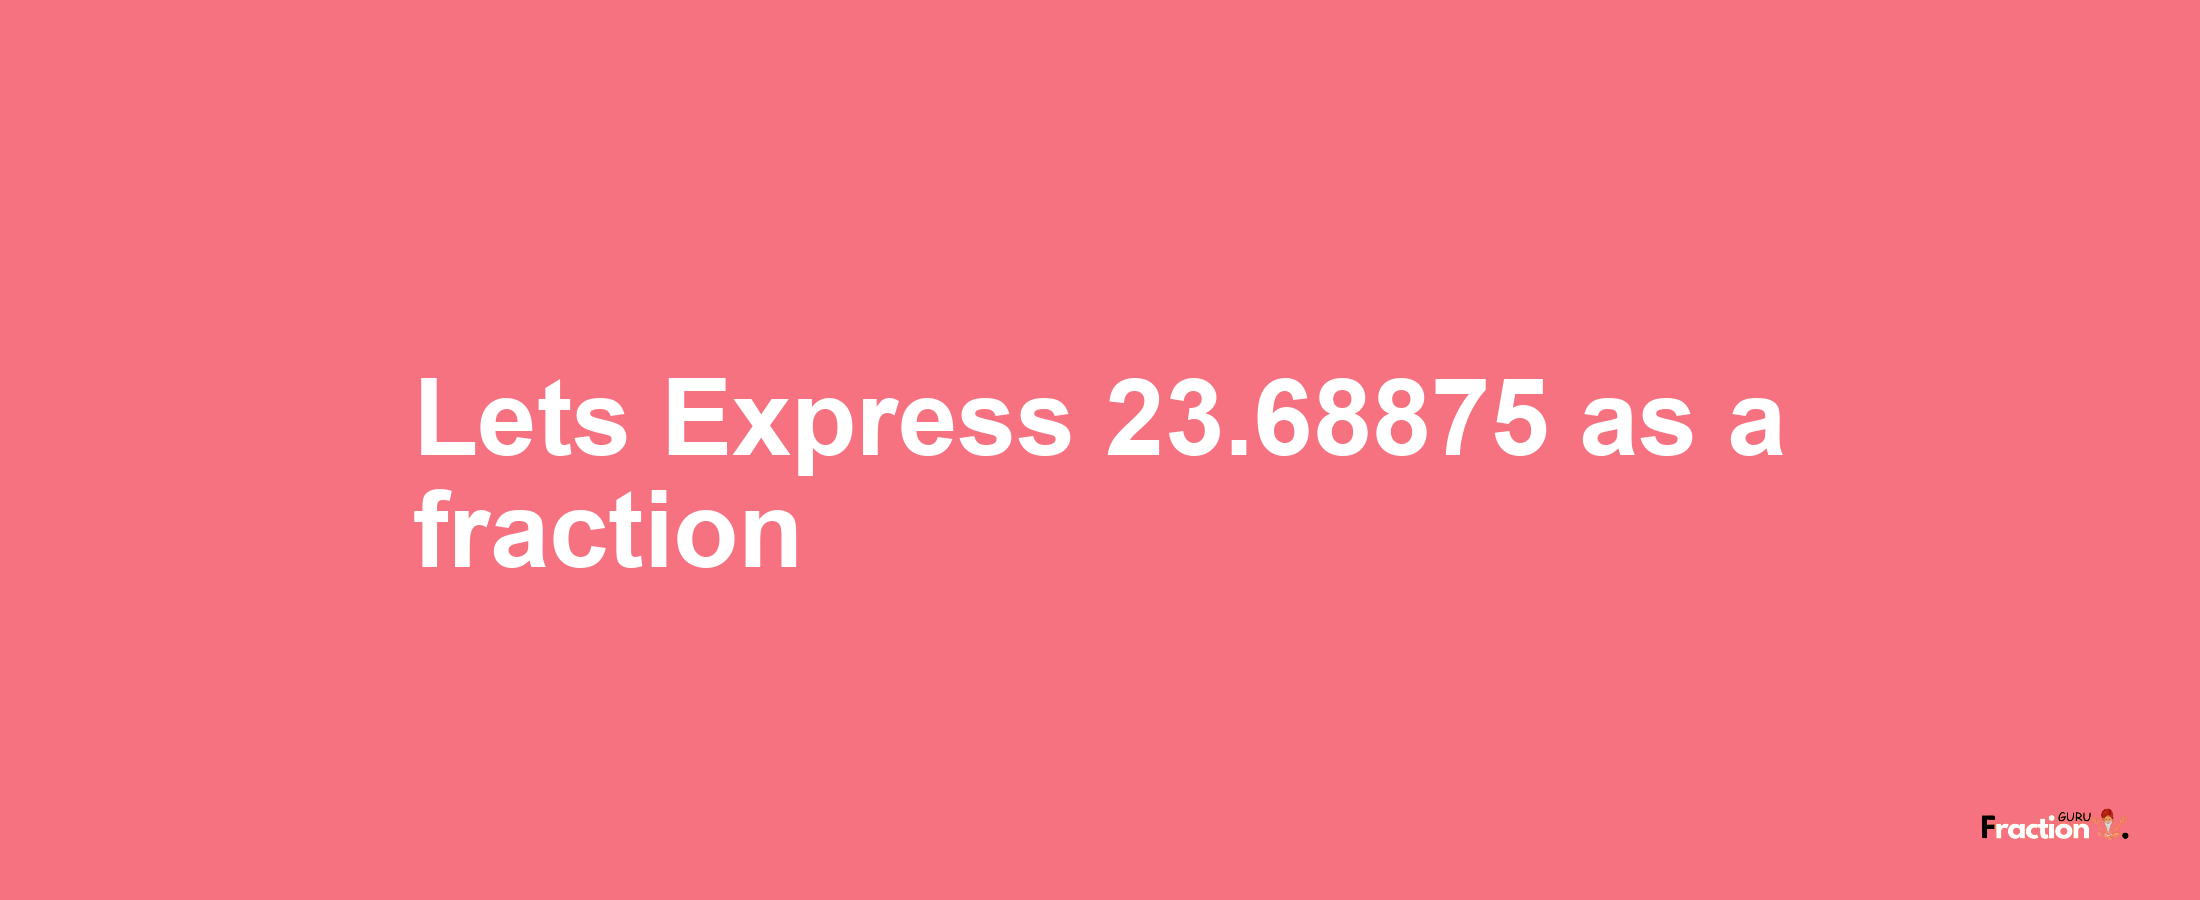 Lets Express 23.68875 as afraction